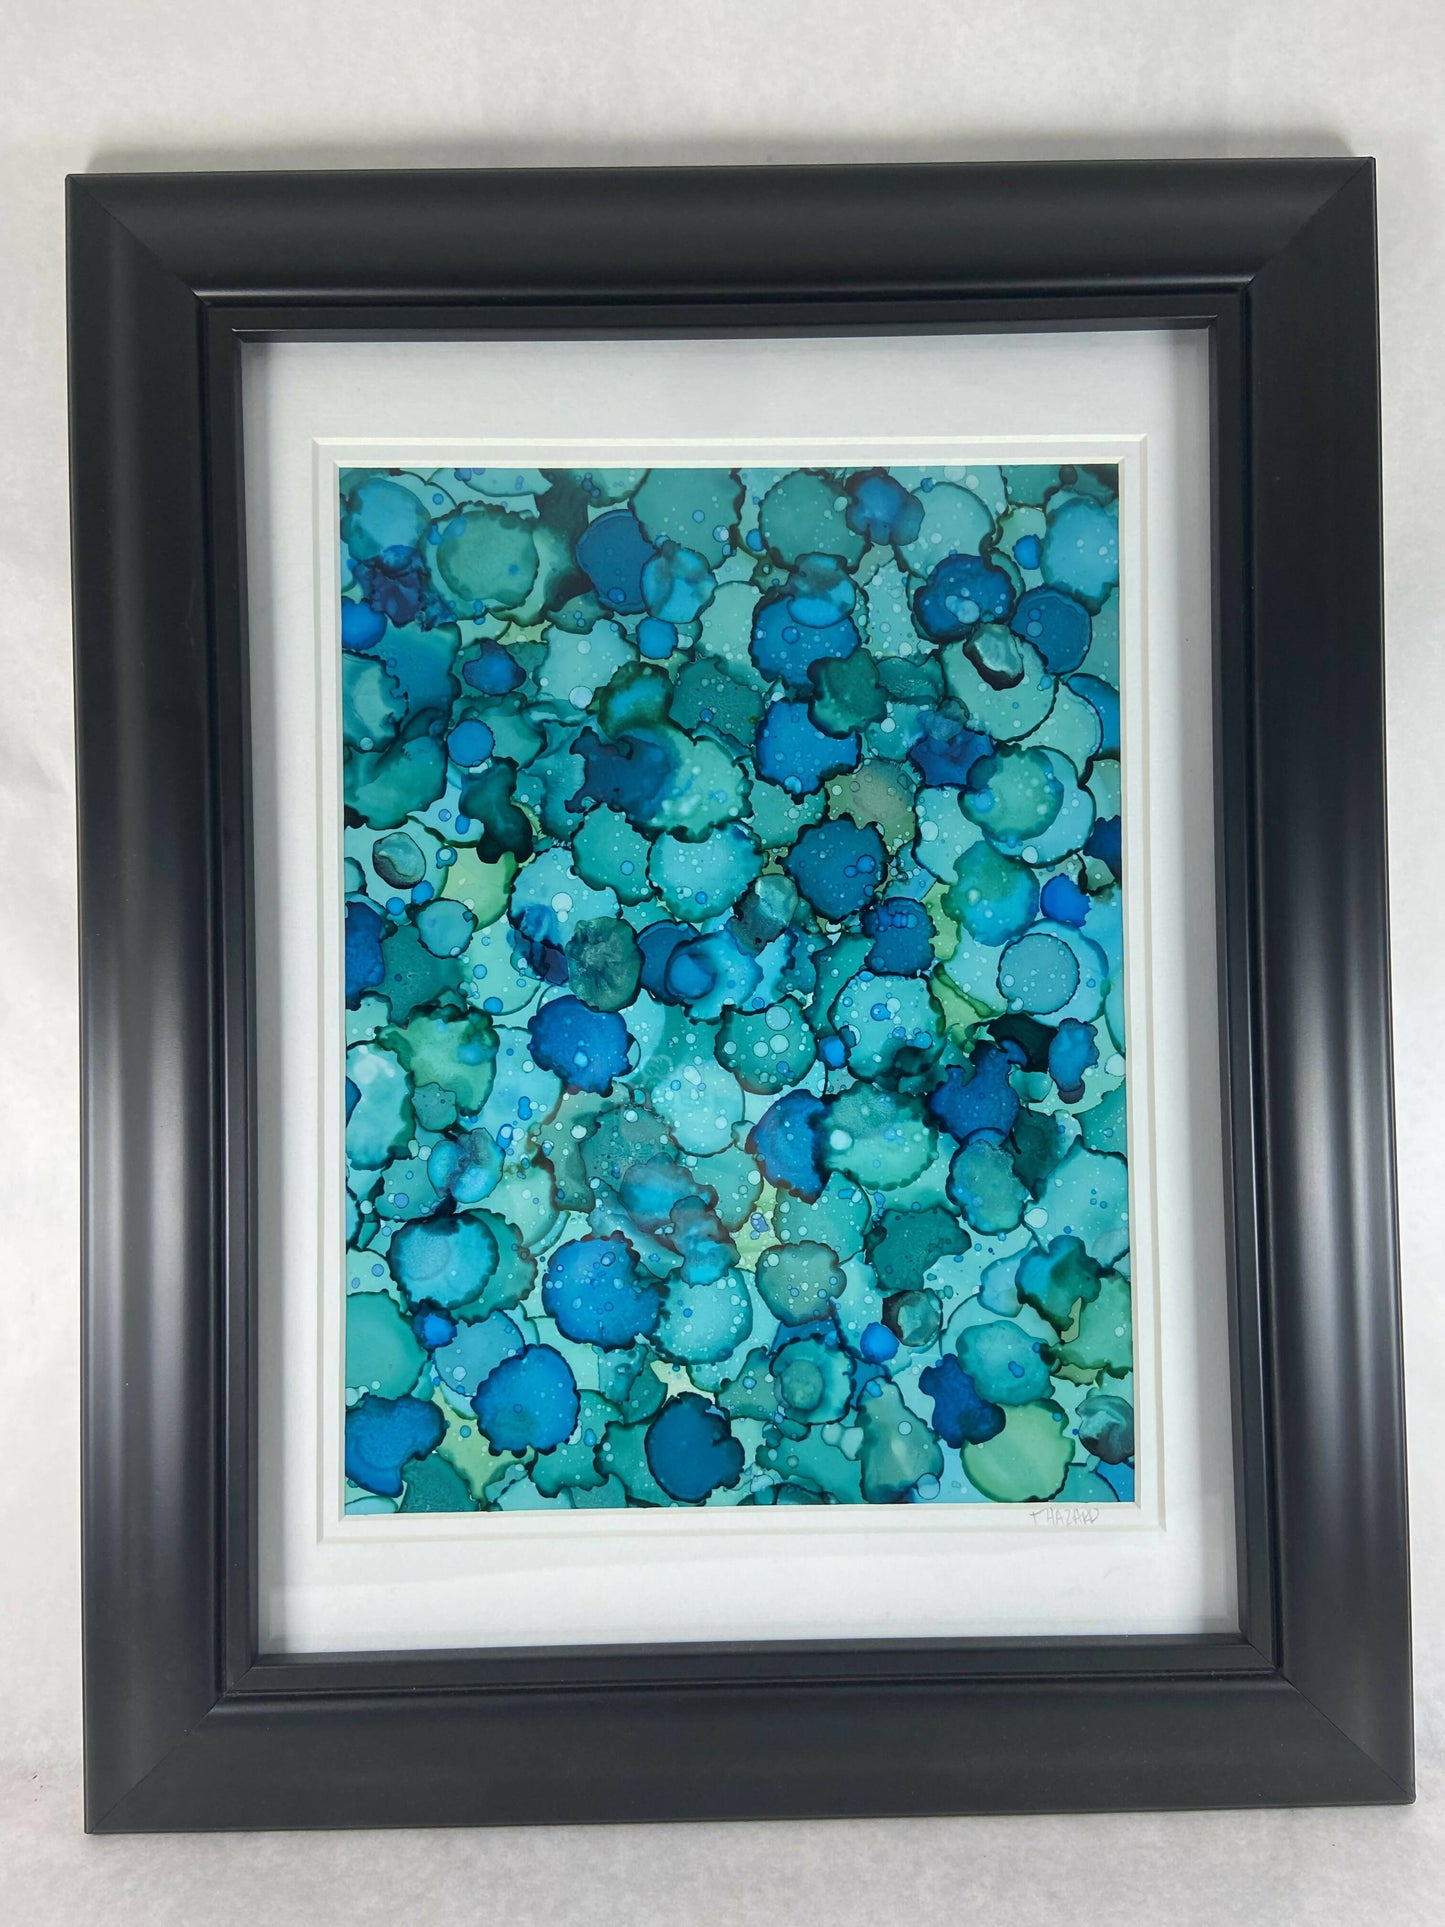 Framed Alcohol Ink Lily Pad Art On Yupo 12x16